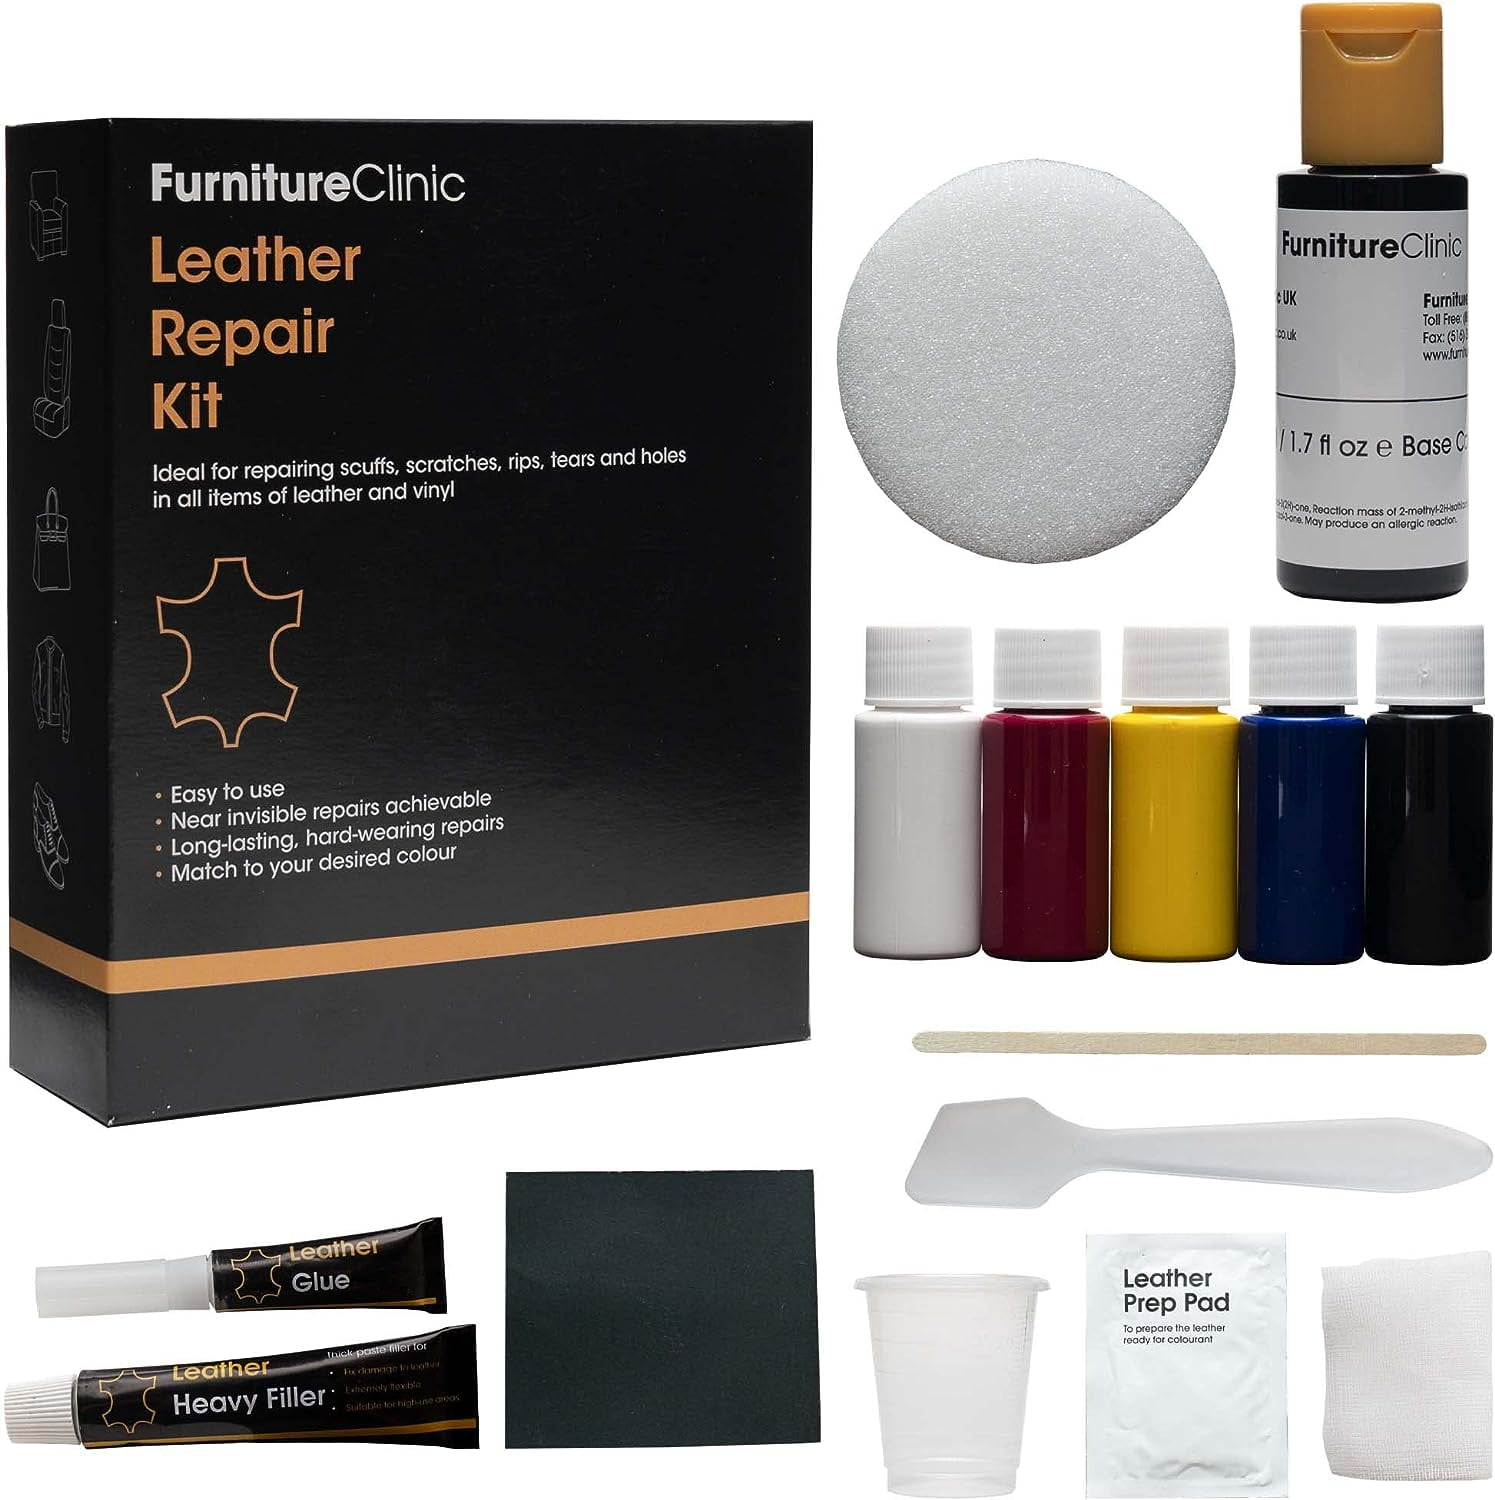 DARK BLUE Leather Repair Kit for holes, tears, scratches, burns, damage etc